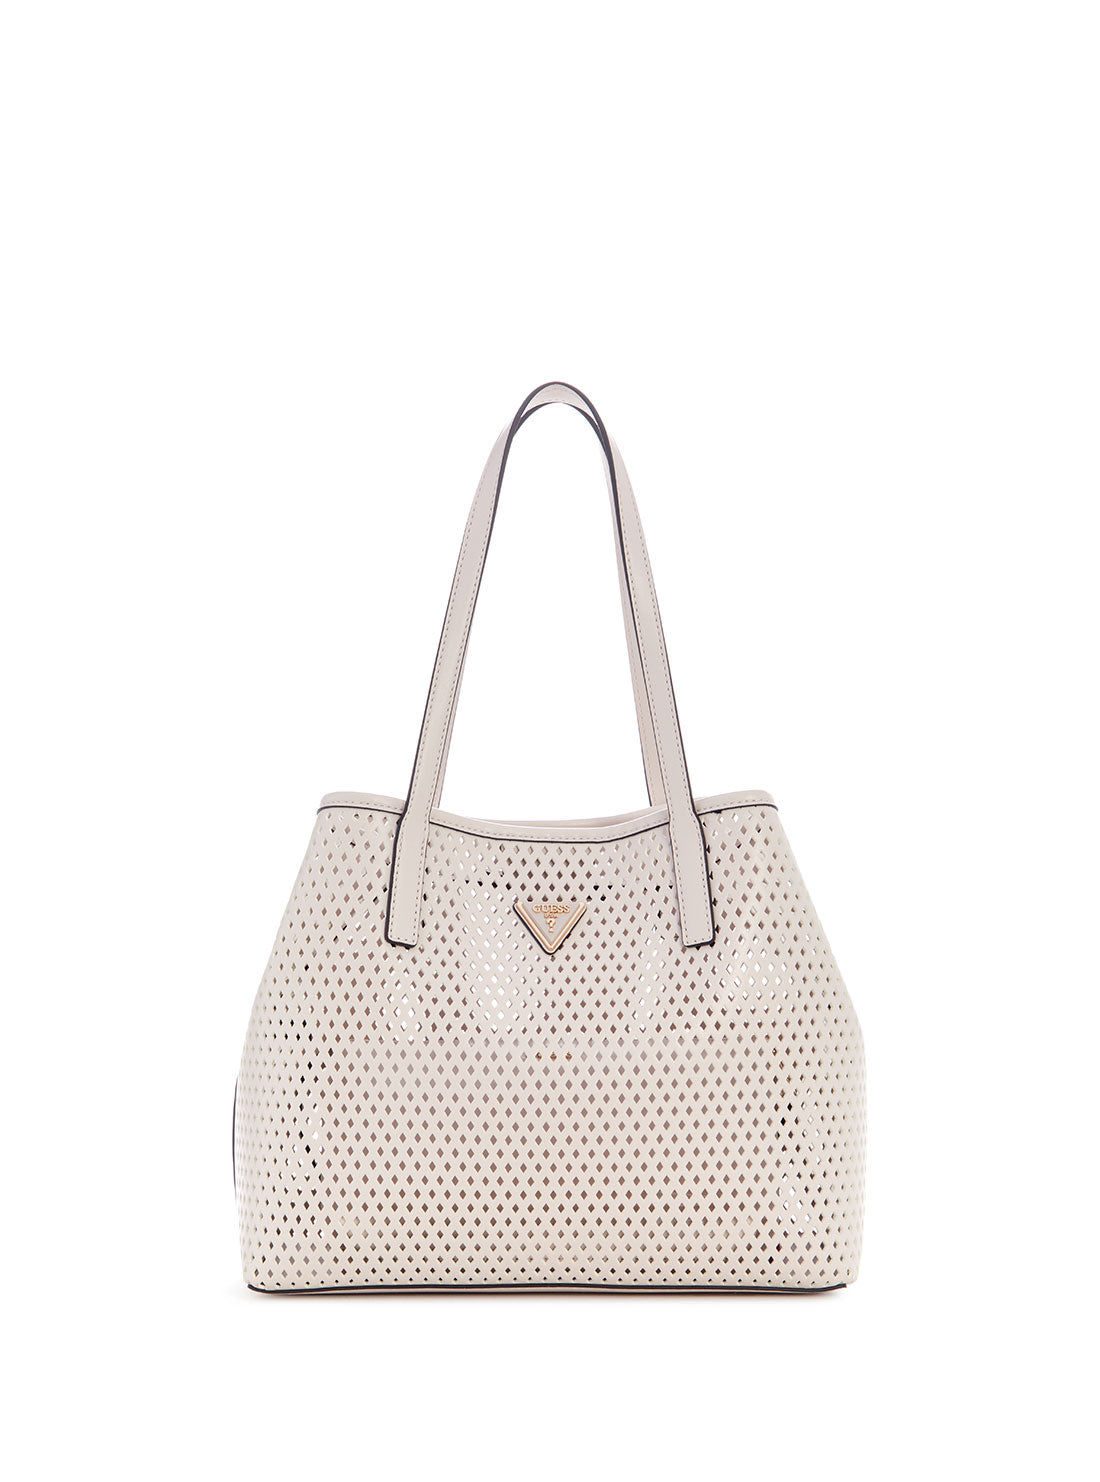 GUESS Women's Stone Woven Vikky Tote Bag WP699523 Front View